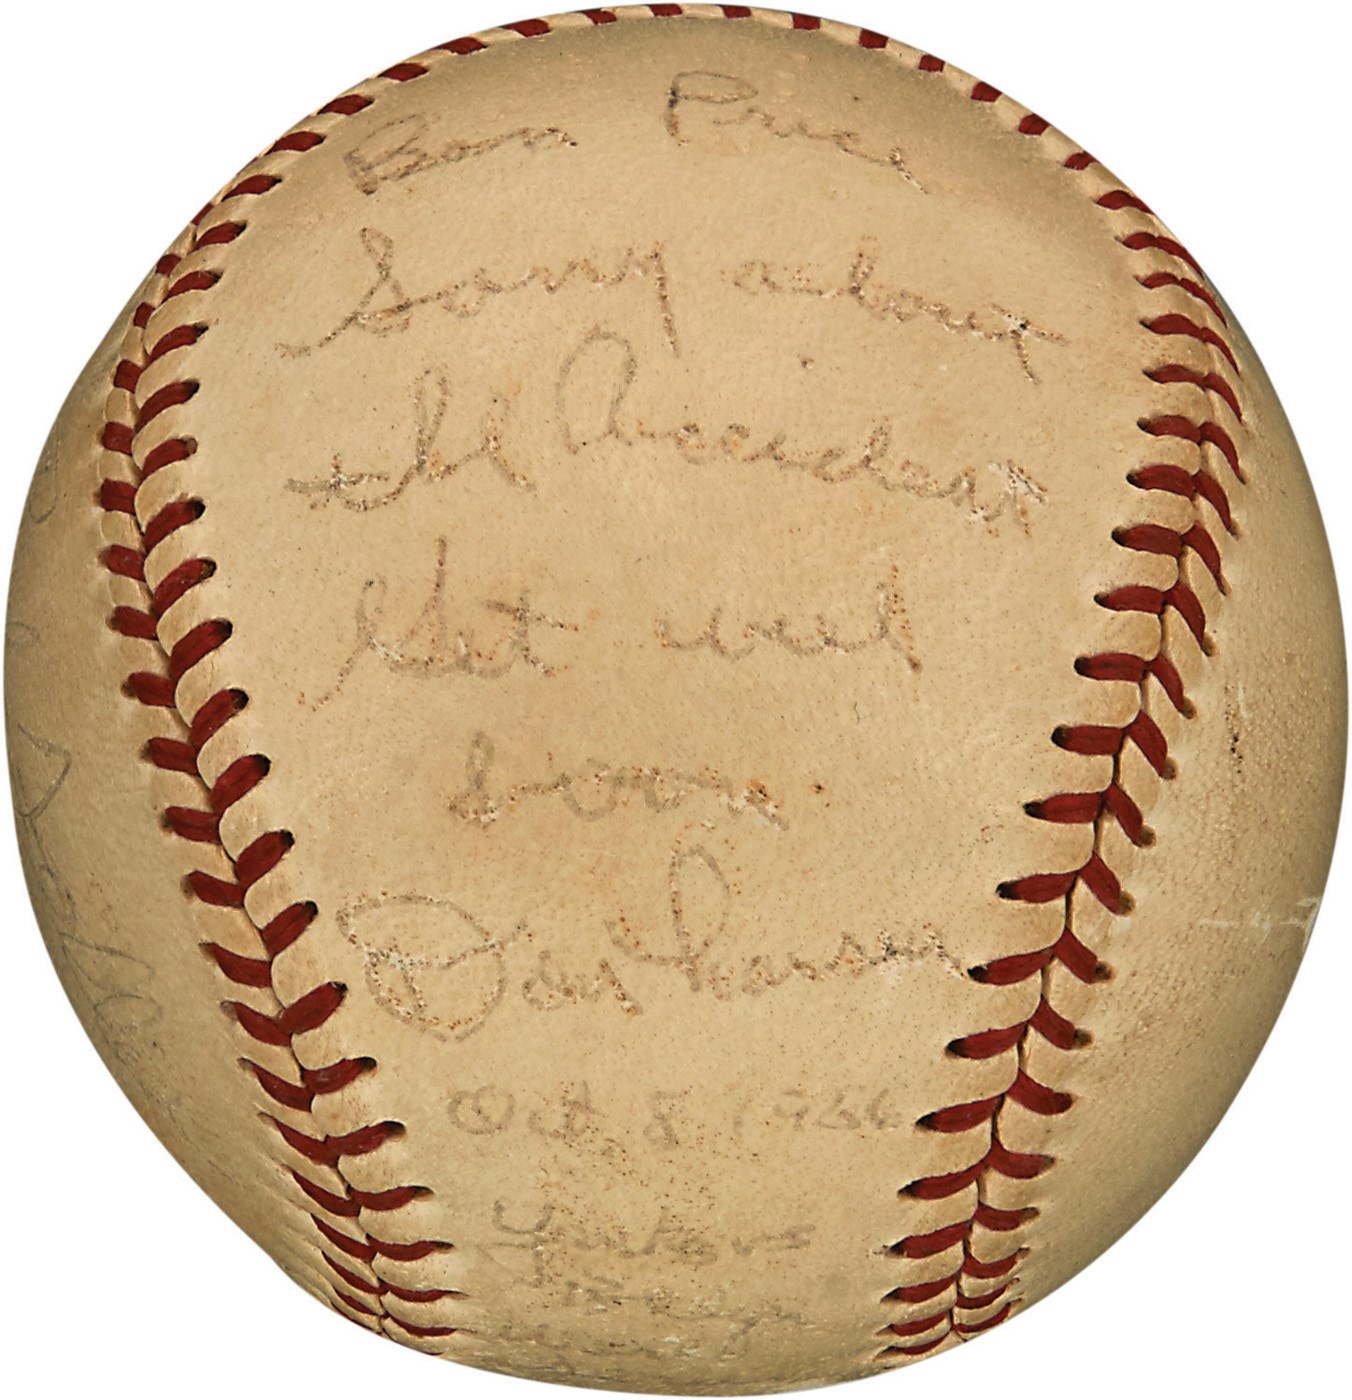 NY Yankees, Giants & Mets - 1956 Don Larsen Perfect Game Baseball with Incredible Provenance